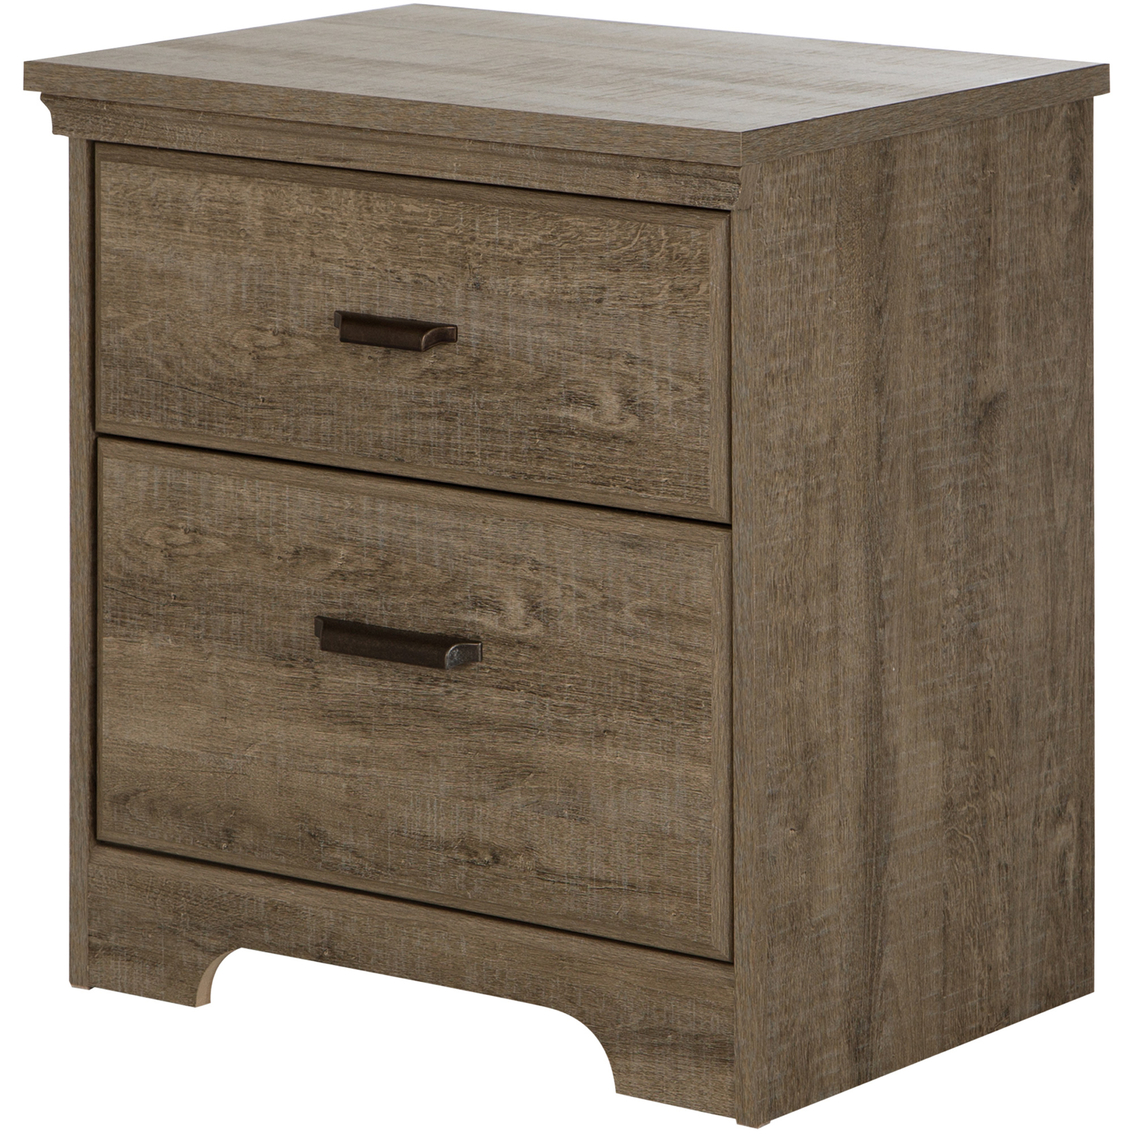 South Shore Versa 6 Drawer Double Dresser and Nightstand Set - Image 3 of 5